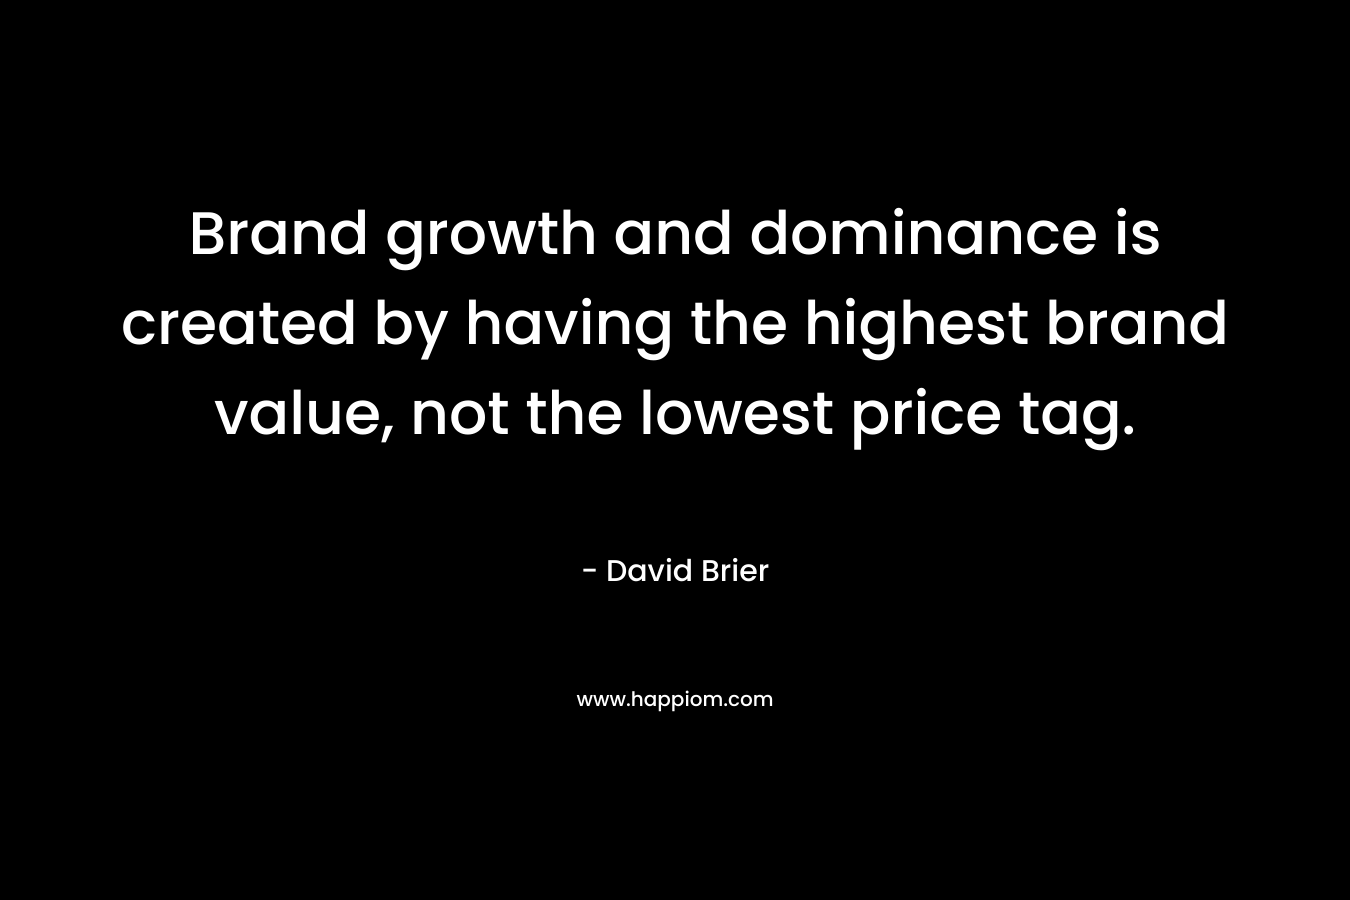 Brand growth and dominance is created by having the highest brand value, not the lowest price tag. – David Brier